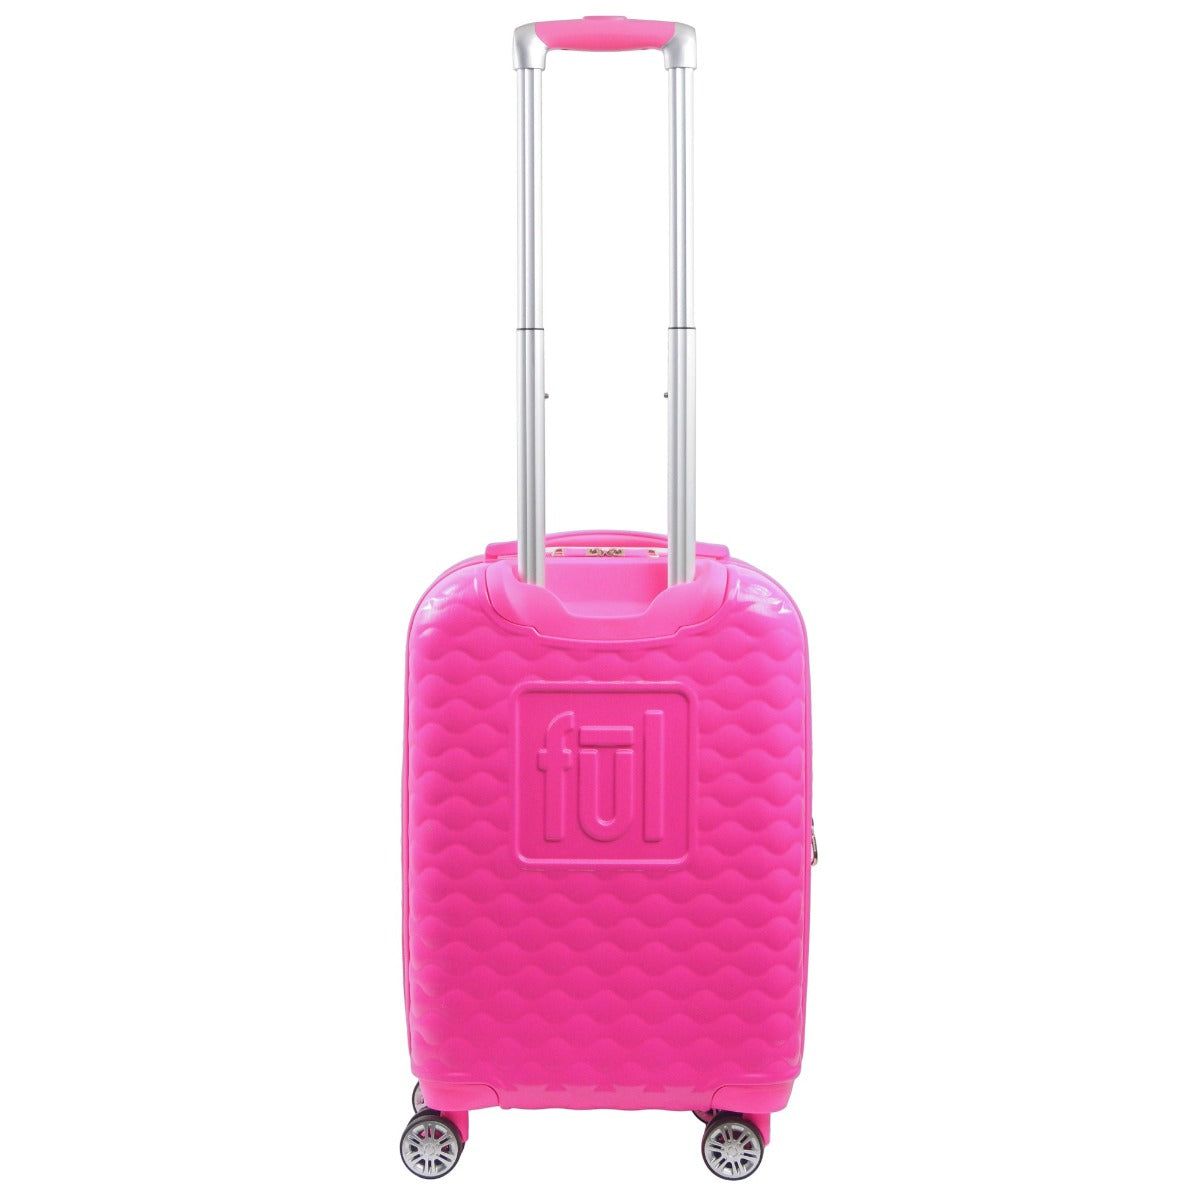 Hot pink Barbie quilted texture 22.5-inch suitcase - best carry-on luggage for travel